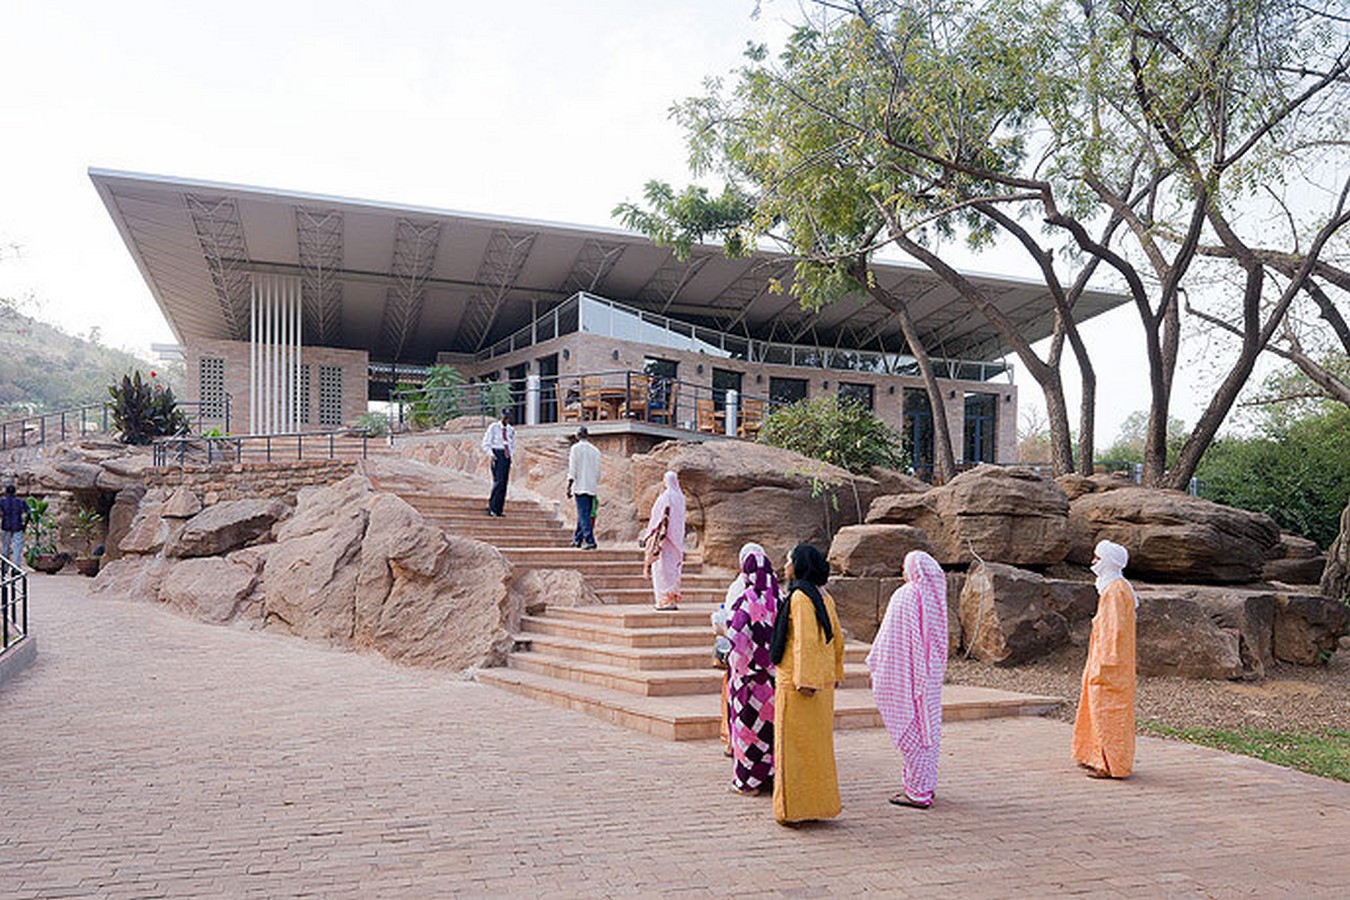 Pritzker Architecture Prize awarded to Diébédo Francis Kéré, First African to receive the highest honor in Architecture. - Sheet4